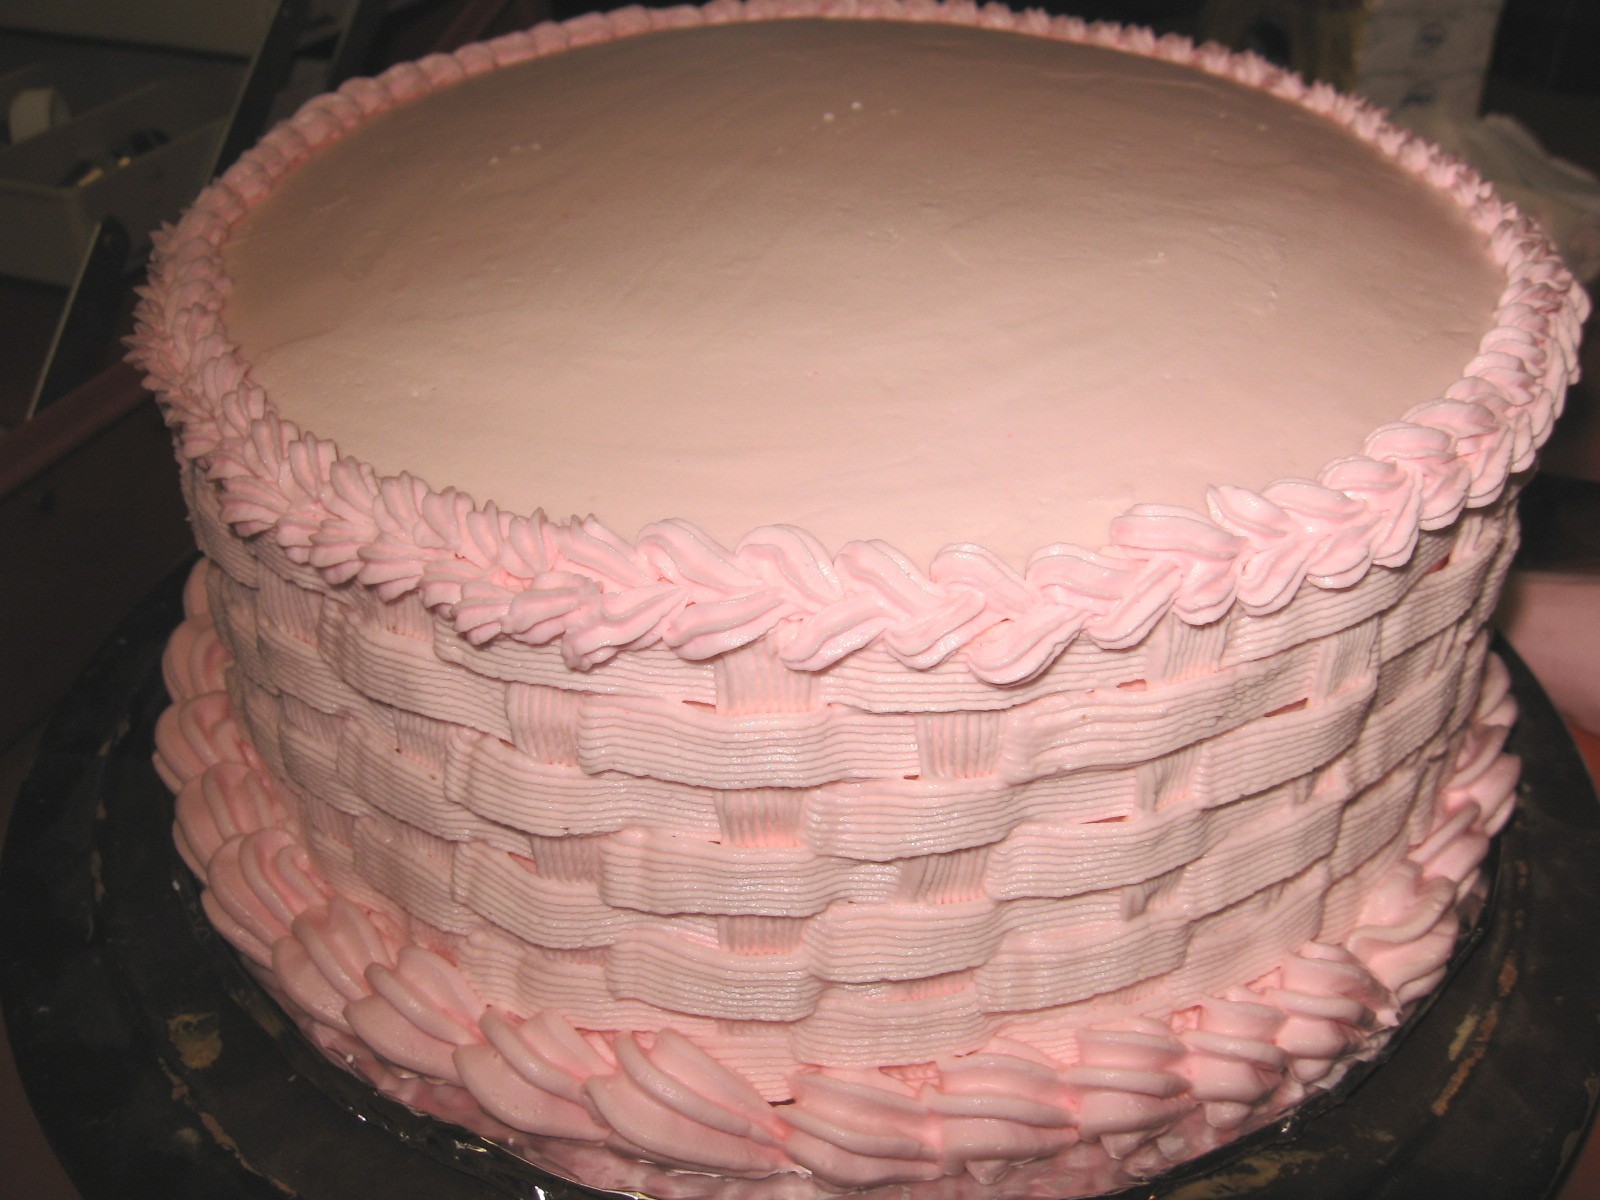 Coleen's Recipes: STURDY BUTTER CREAM FROSTING